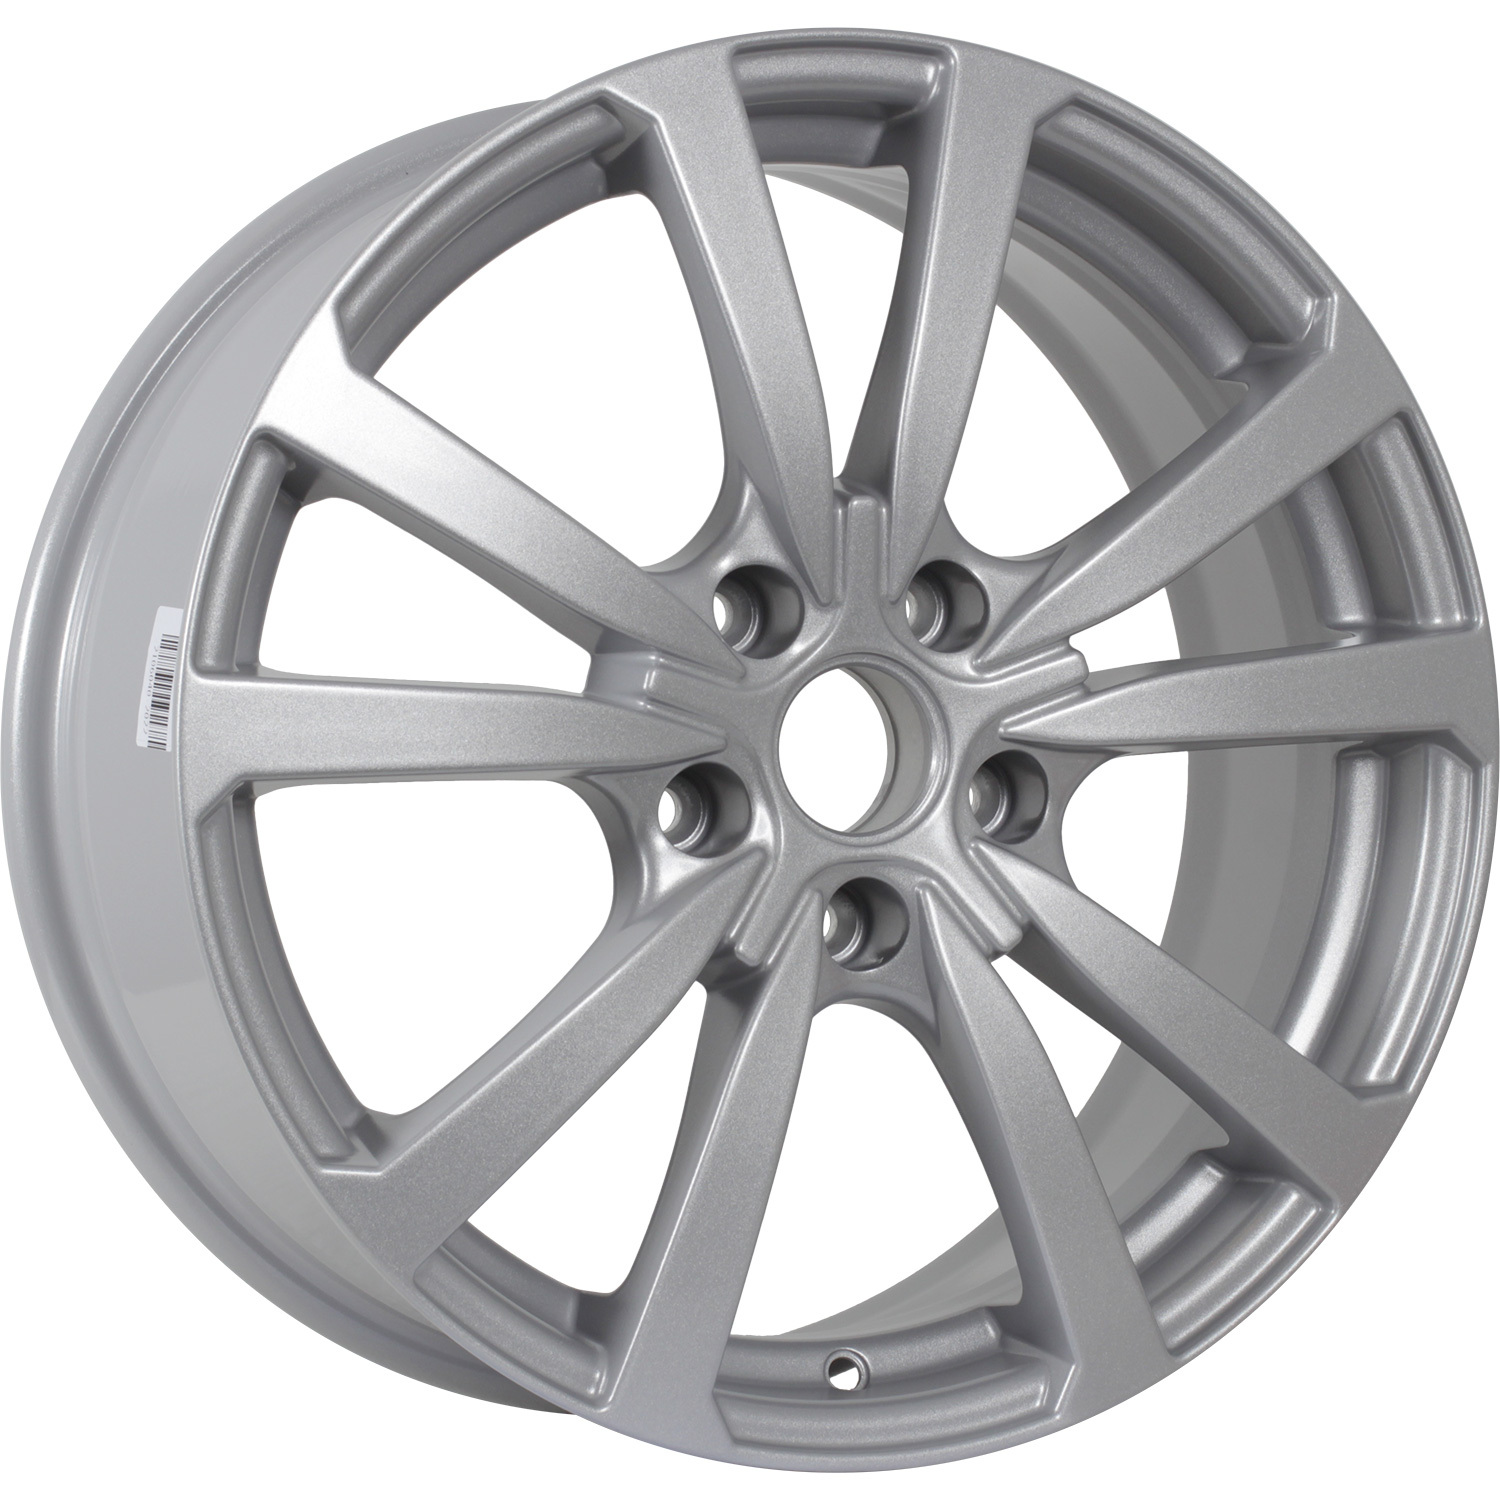 ifree бэнкс 7x17 5x100 d67 1 et45 neo classic Колесный диск iFree Бэнкс 7x17/5x112 D66.6 ET35 Neo_classic